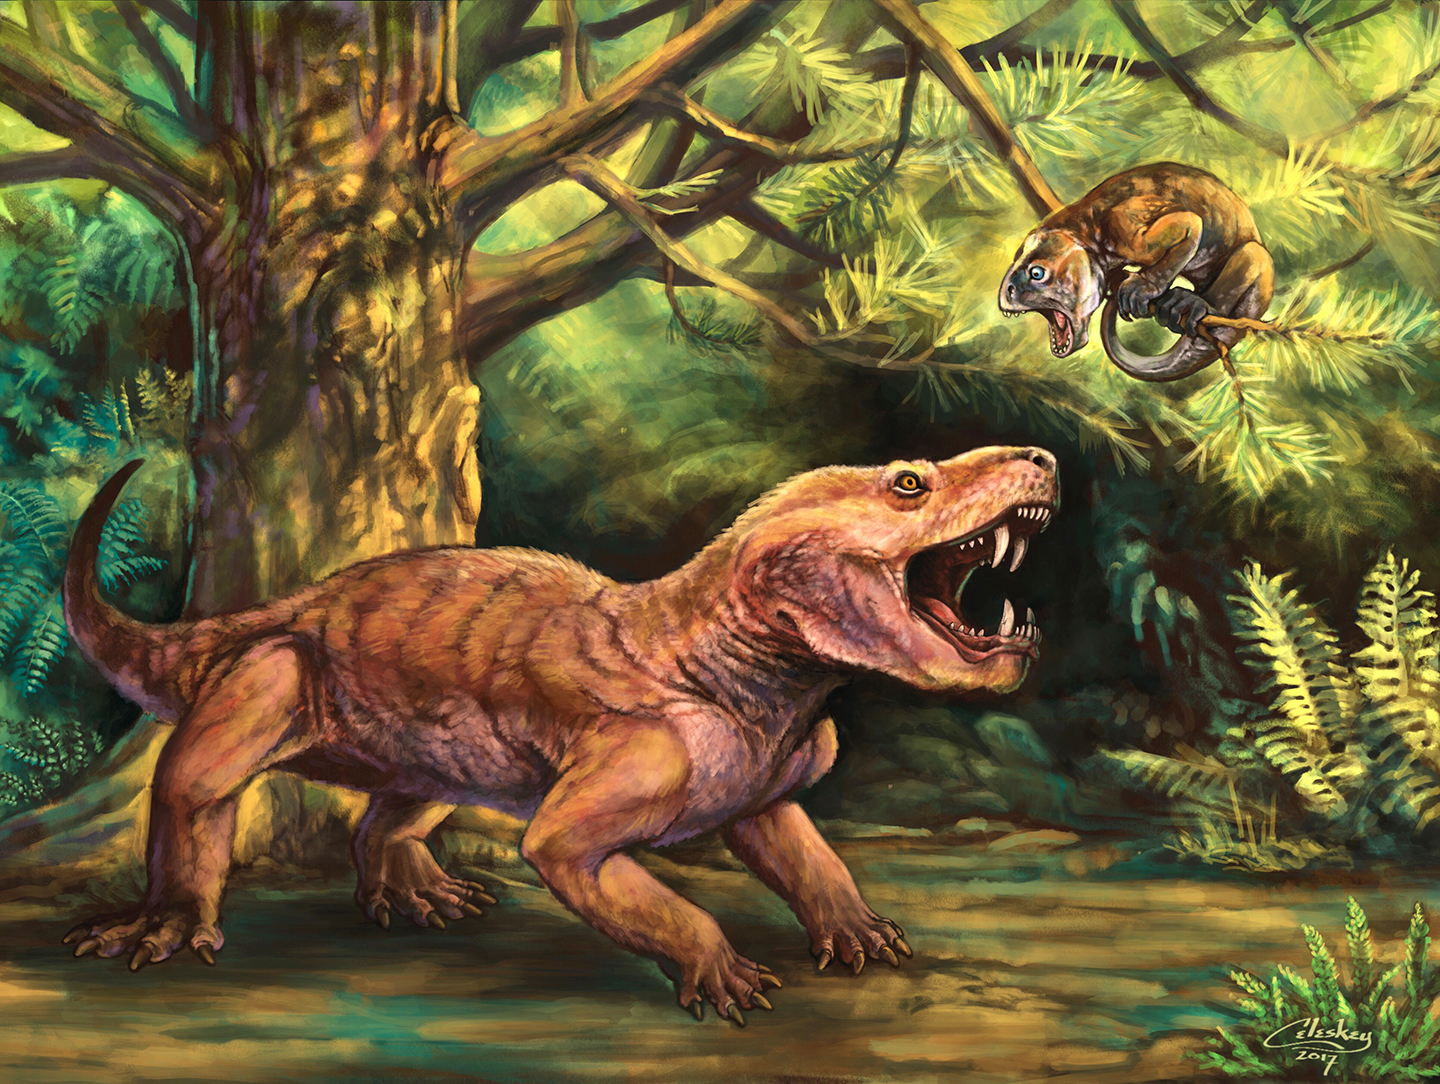 Illustration of the therapsid Gorynynchus, illustrated by Matt Celeskey. Shared here with the artist's permission.